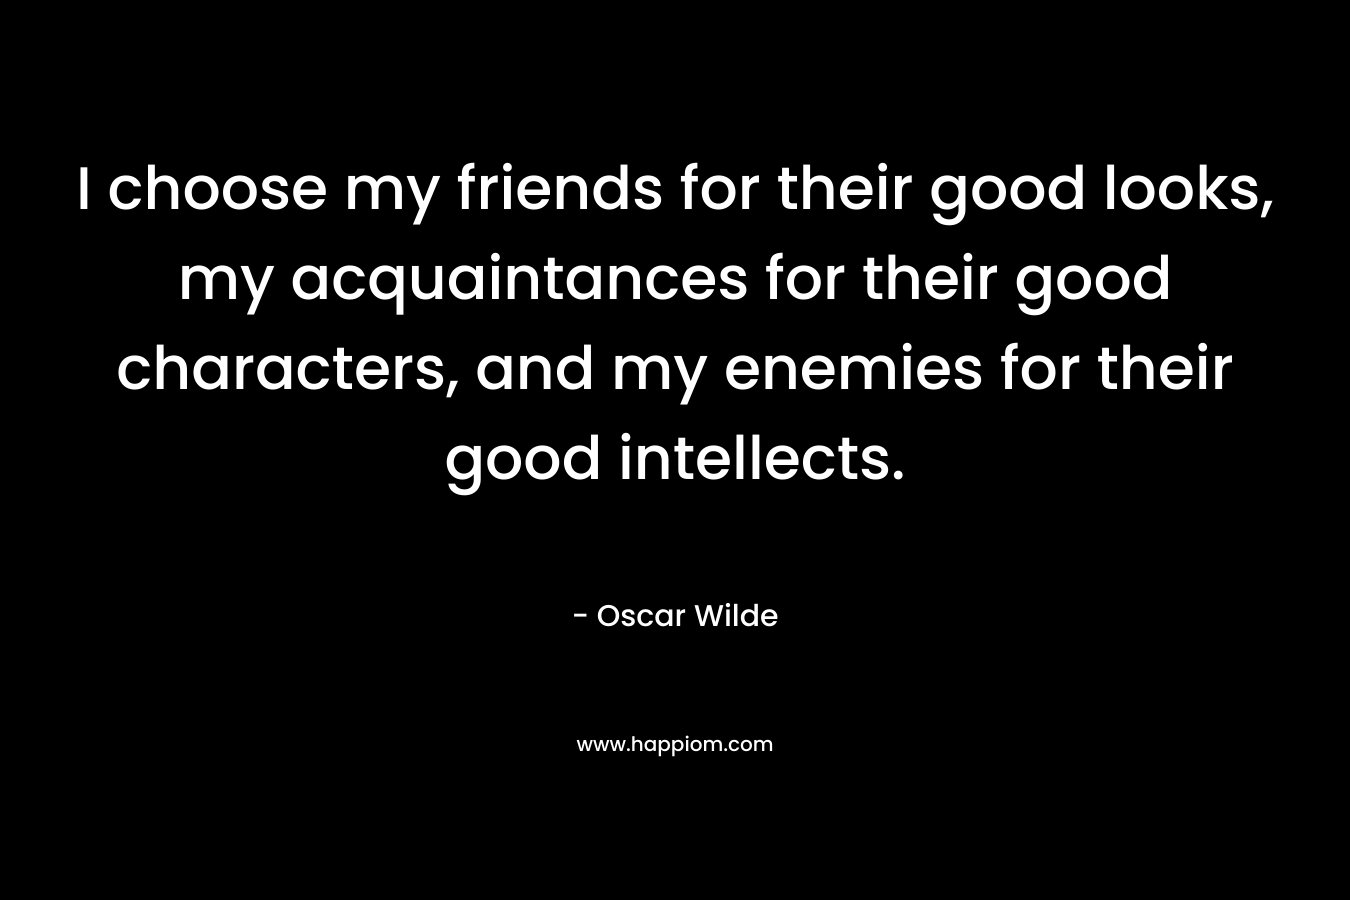 I choose my friends for their good looks, my acquaintances for their good characters, and my enemies for their good intellects. – Oscar Wilde